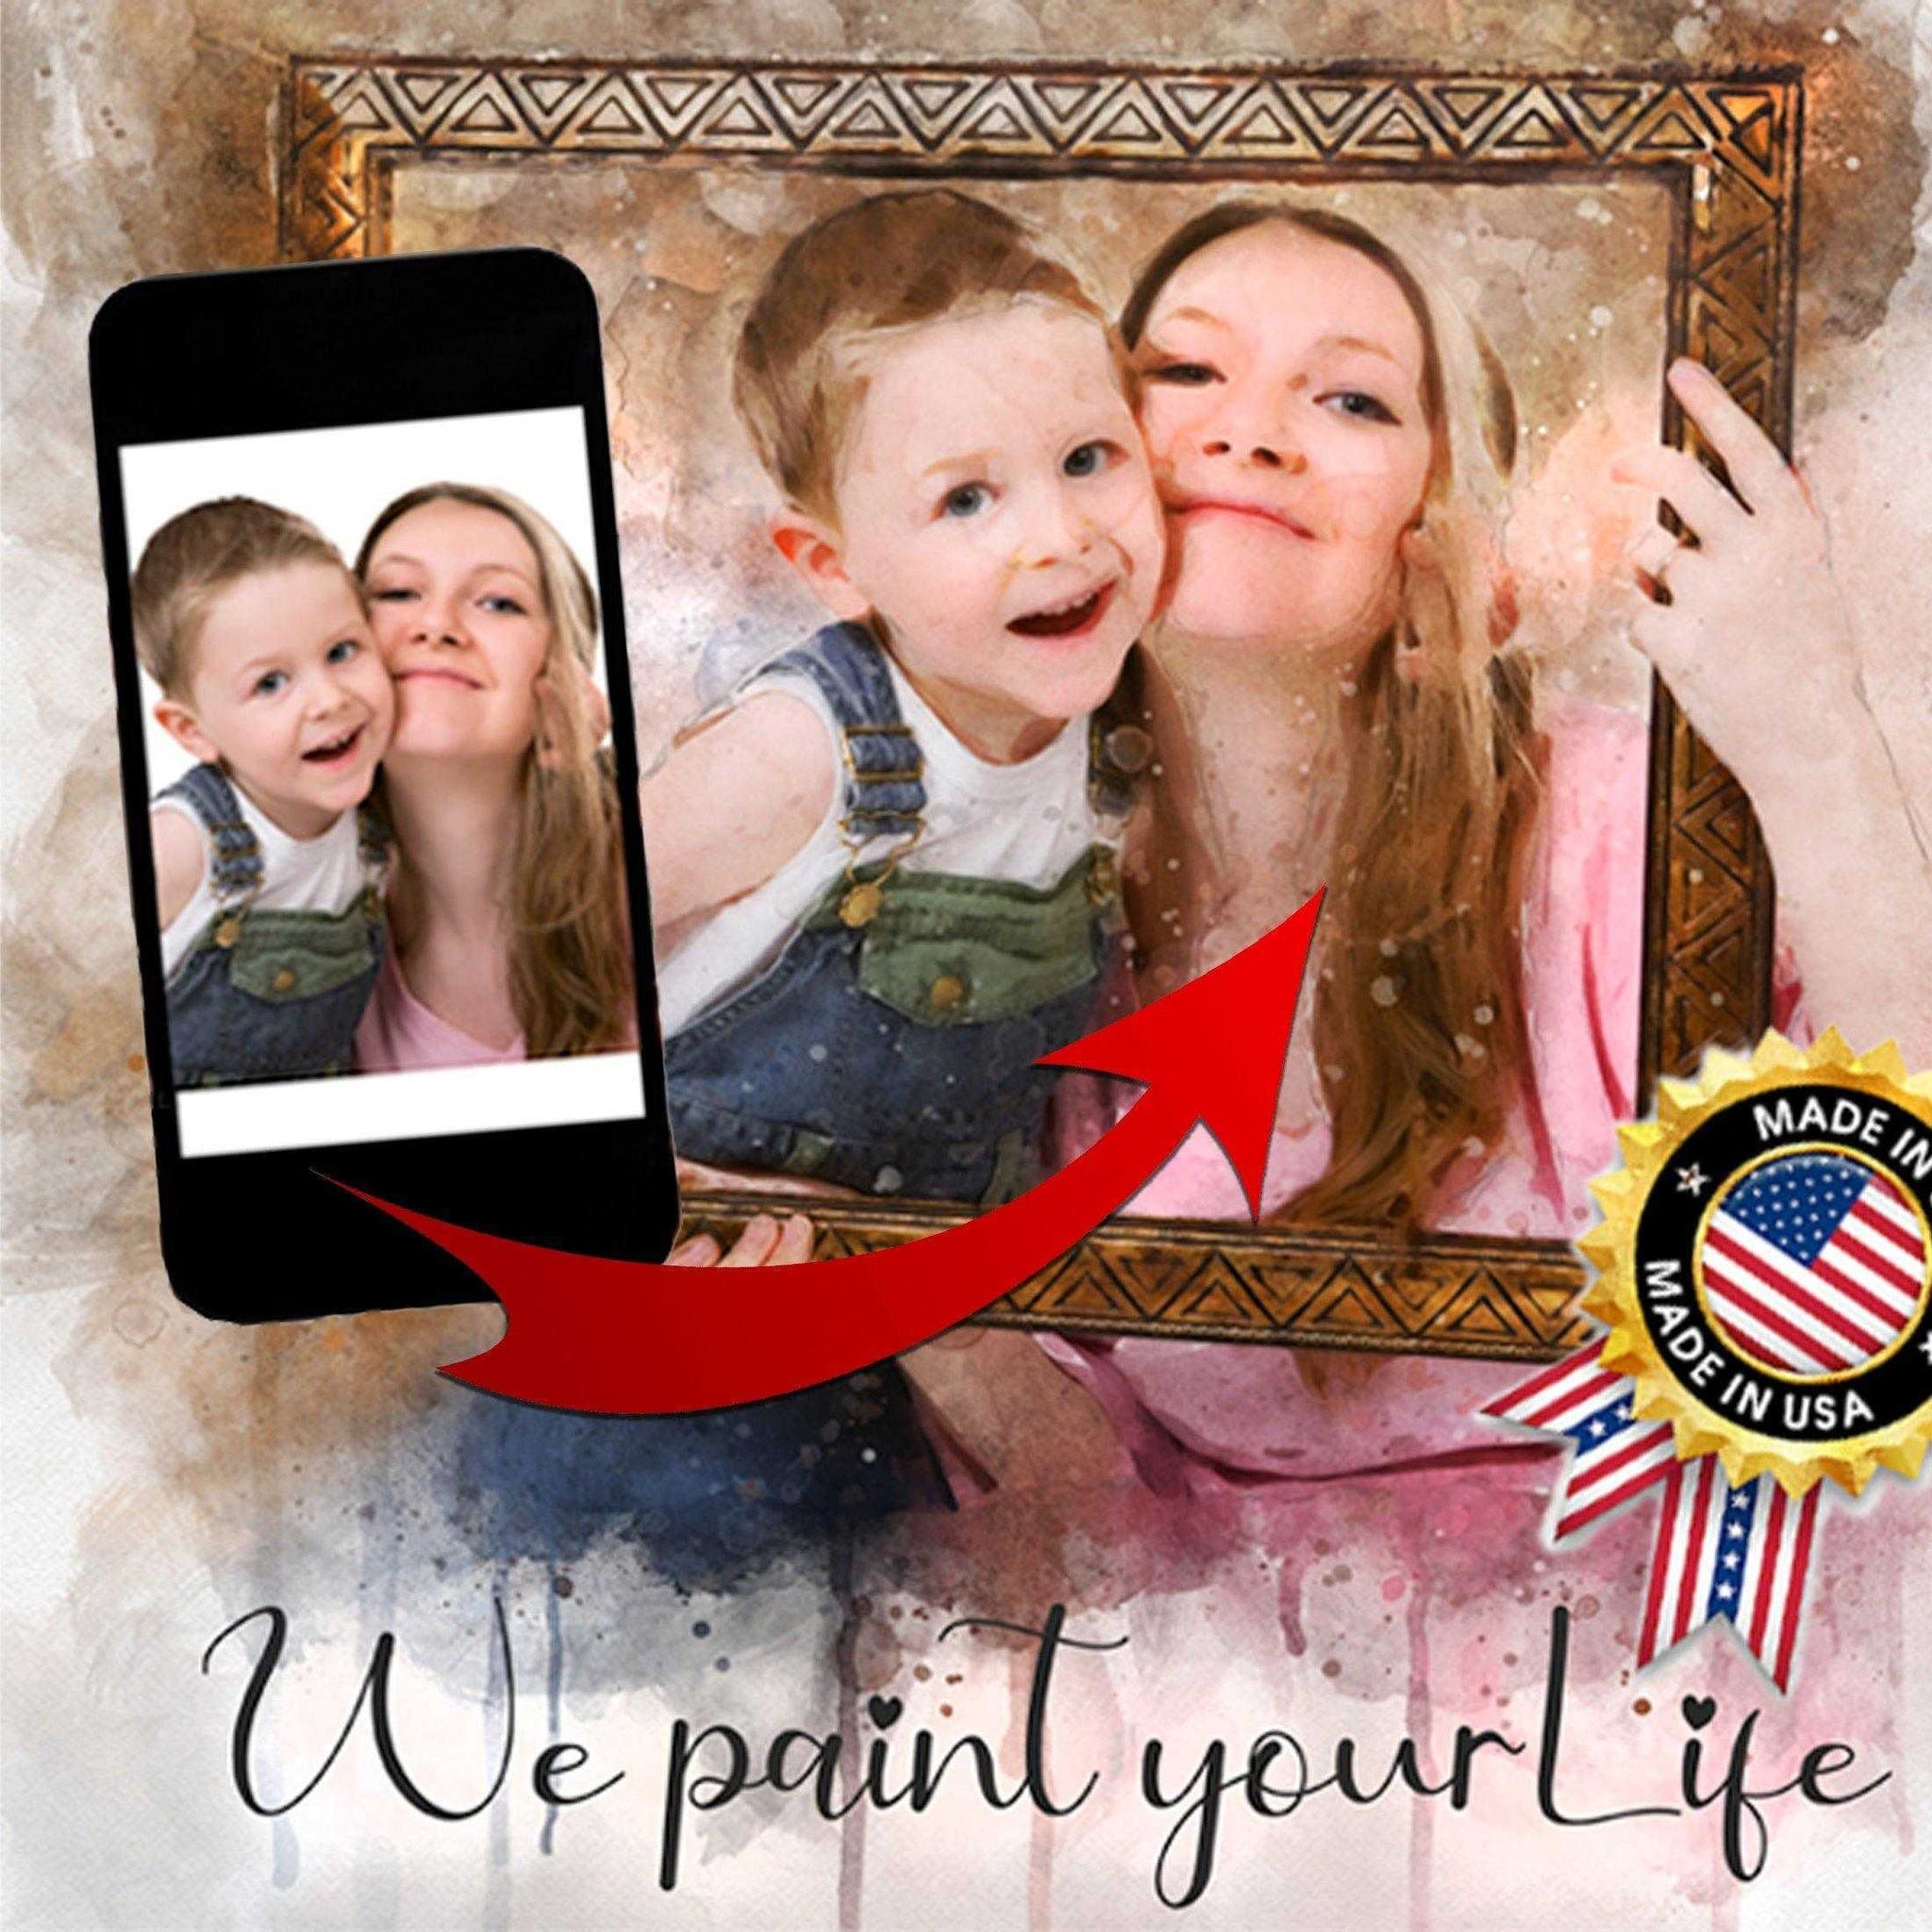 Painted Pictures of Loved Ones | Painting with Deceased Loved Ones on Canvas - FromPicToArt